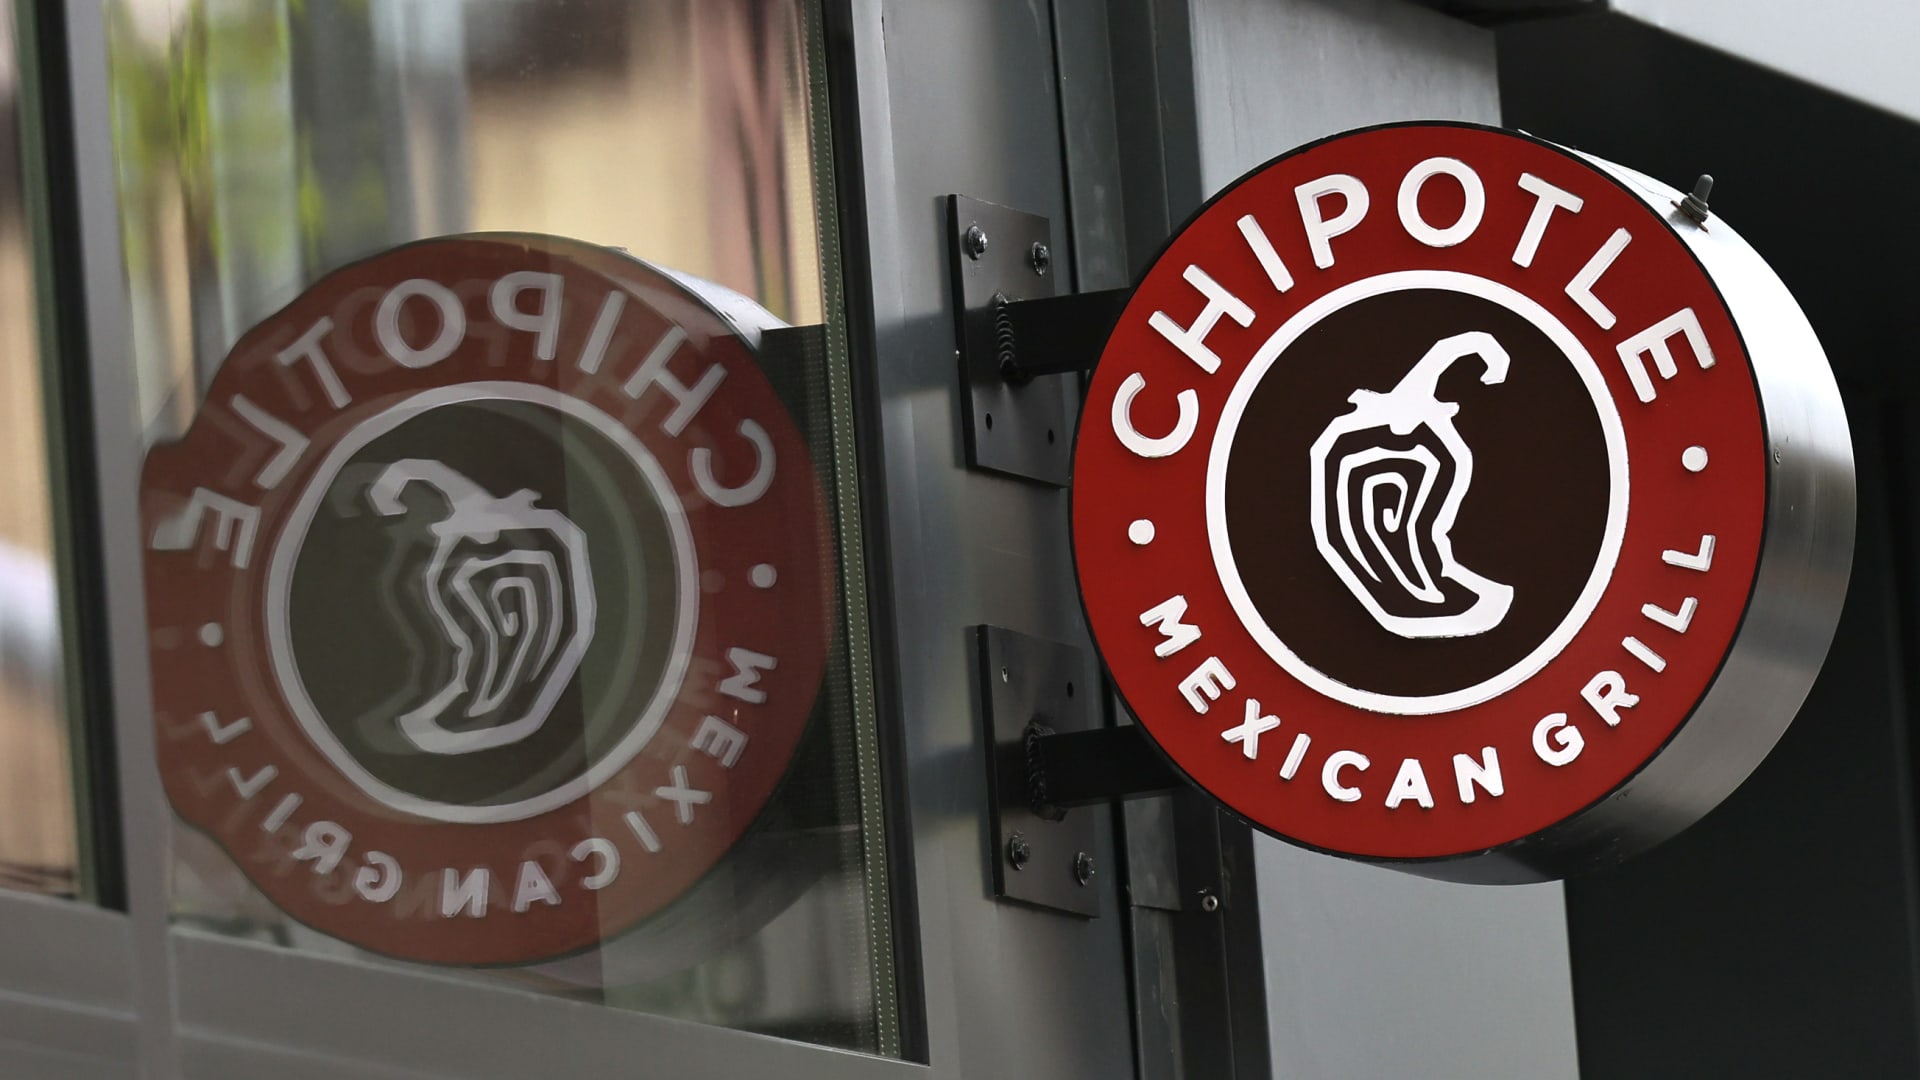 Chipotle restaurant in Michigan votes to unionize, in a first for the chain